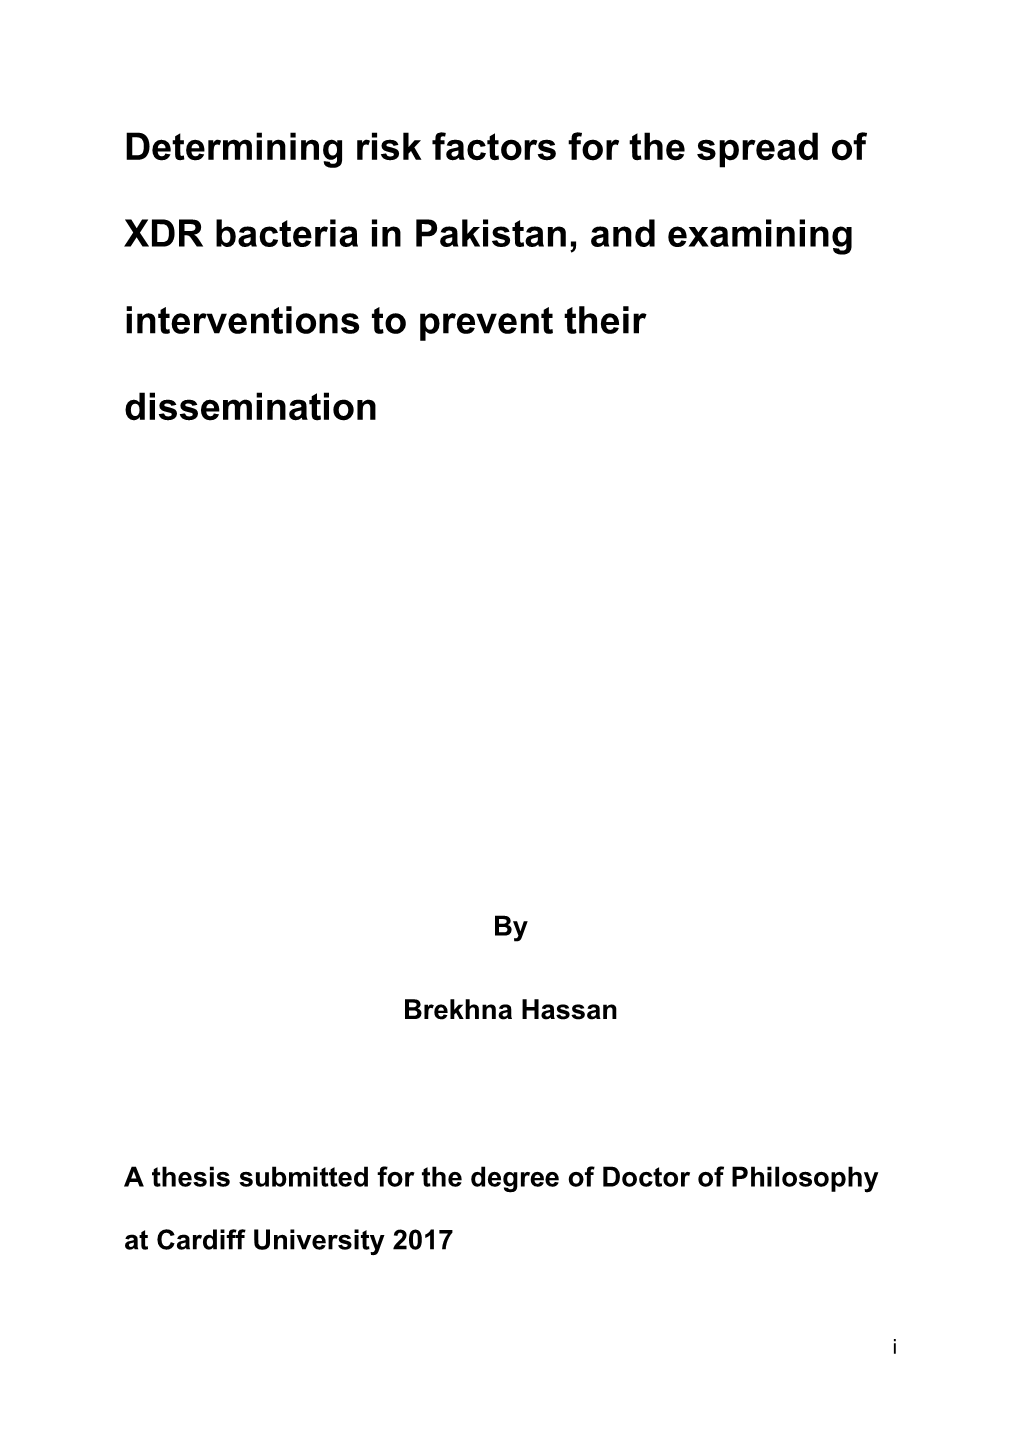 Determining Risk Factors for the Spread of XDR Bacteria in Pakistan, And